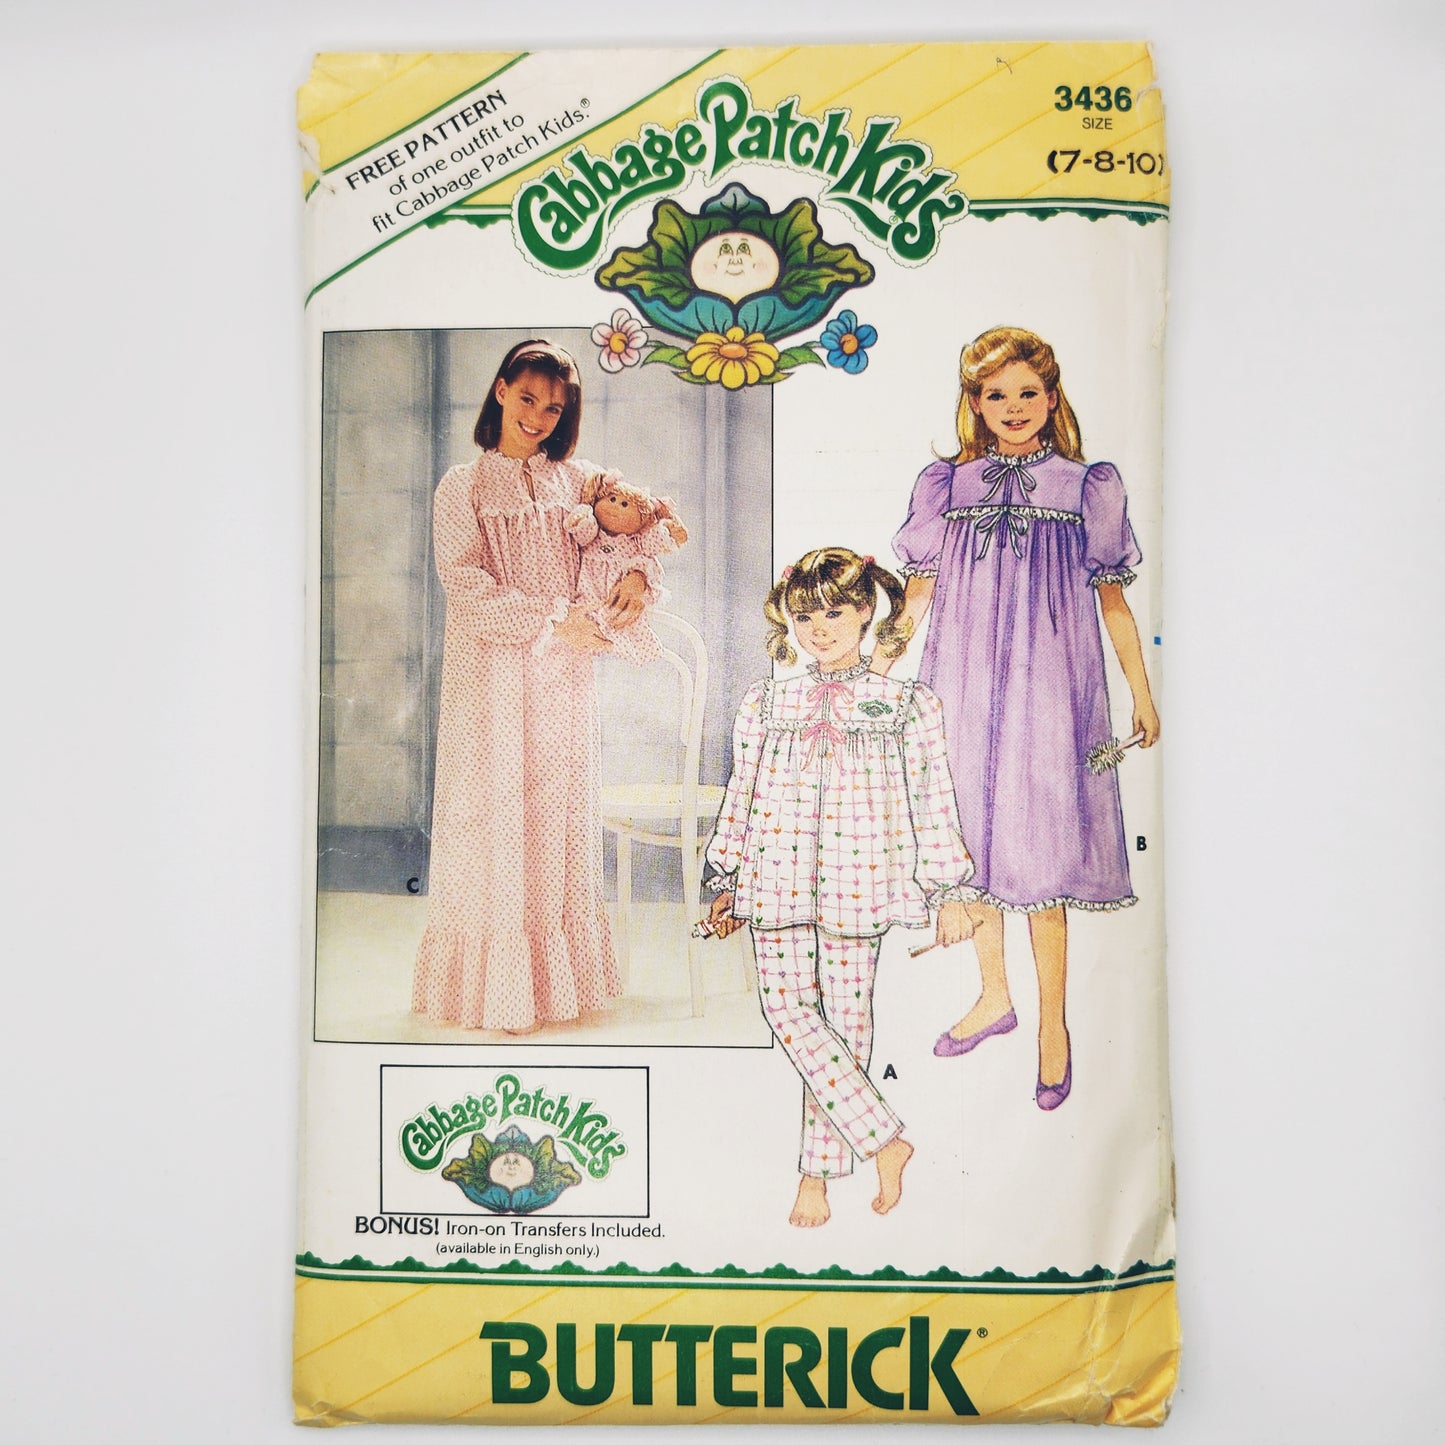 1985 Butterick Pattern 3436 Cabbage Patch Kids Girls Nightgown PJ Top Pants Size 7-8-10